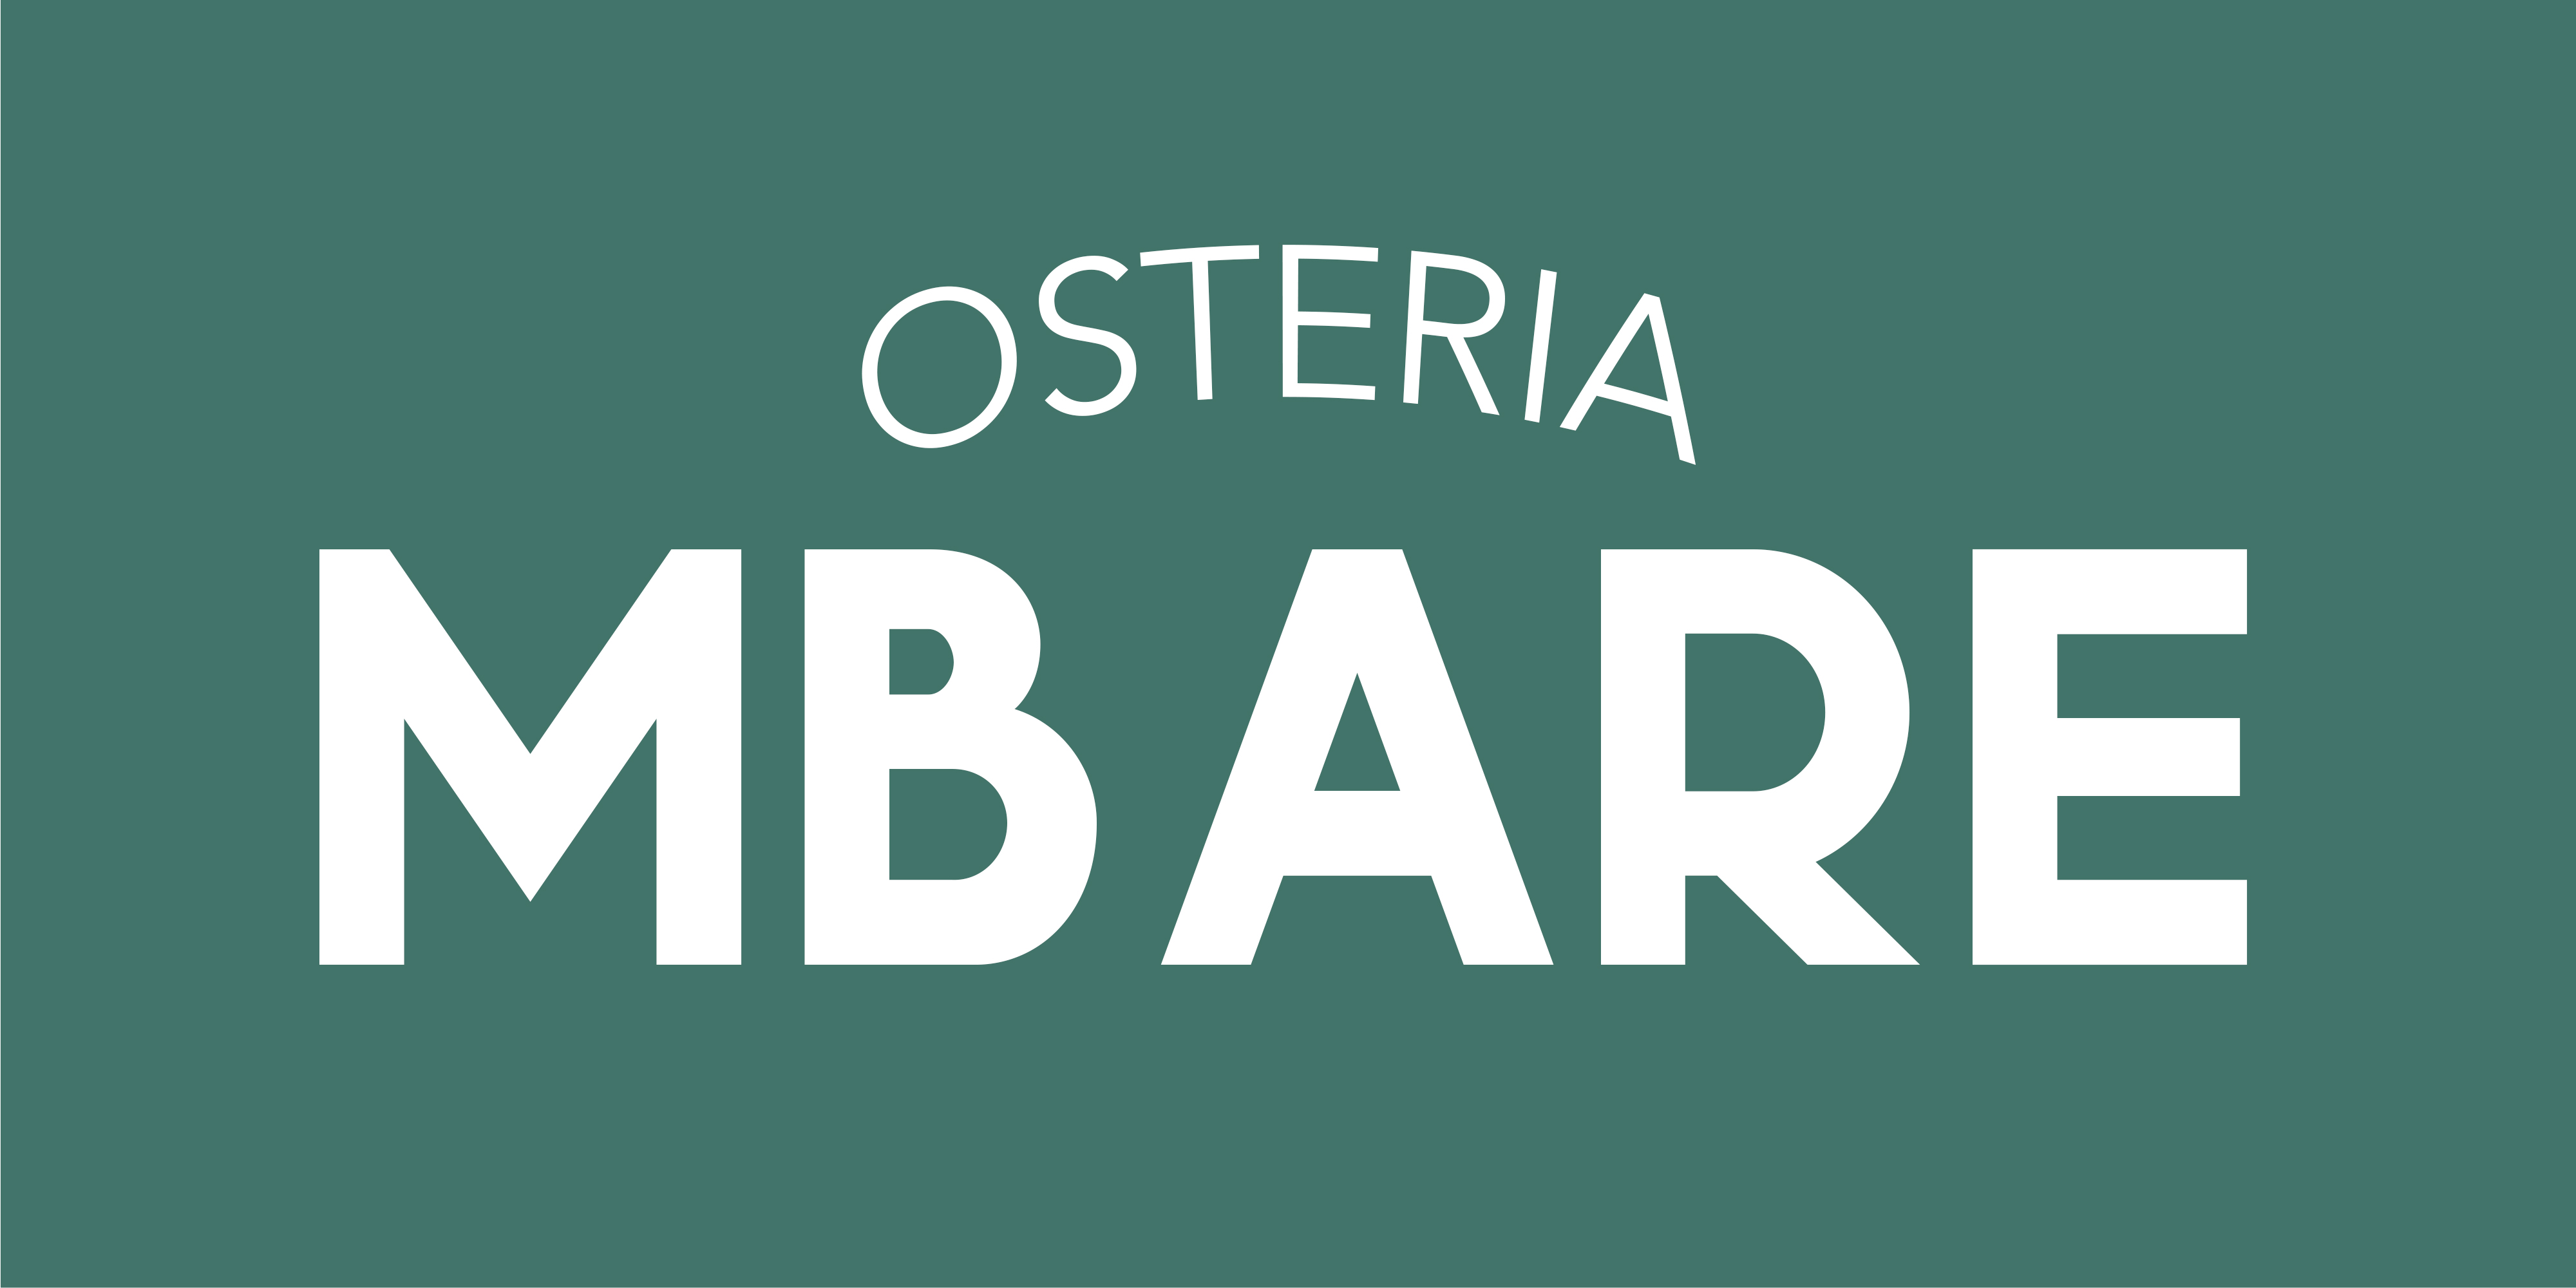 Discover Osteria MBARE the Fantastic restaurant in London, UK